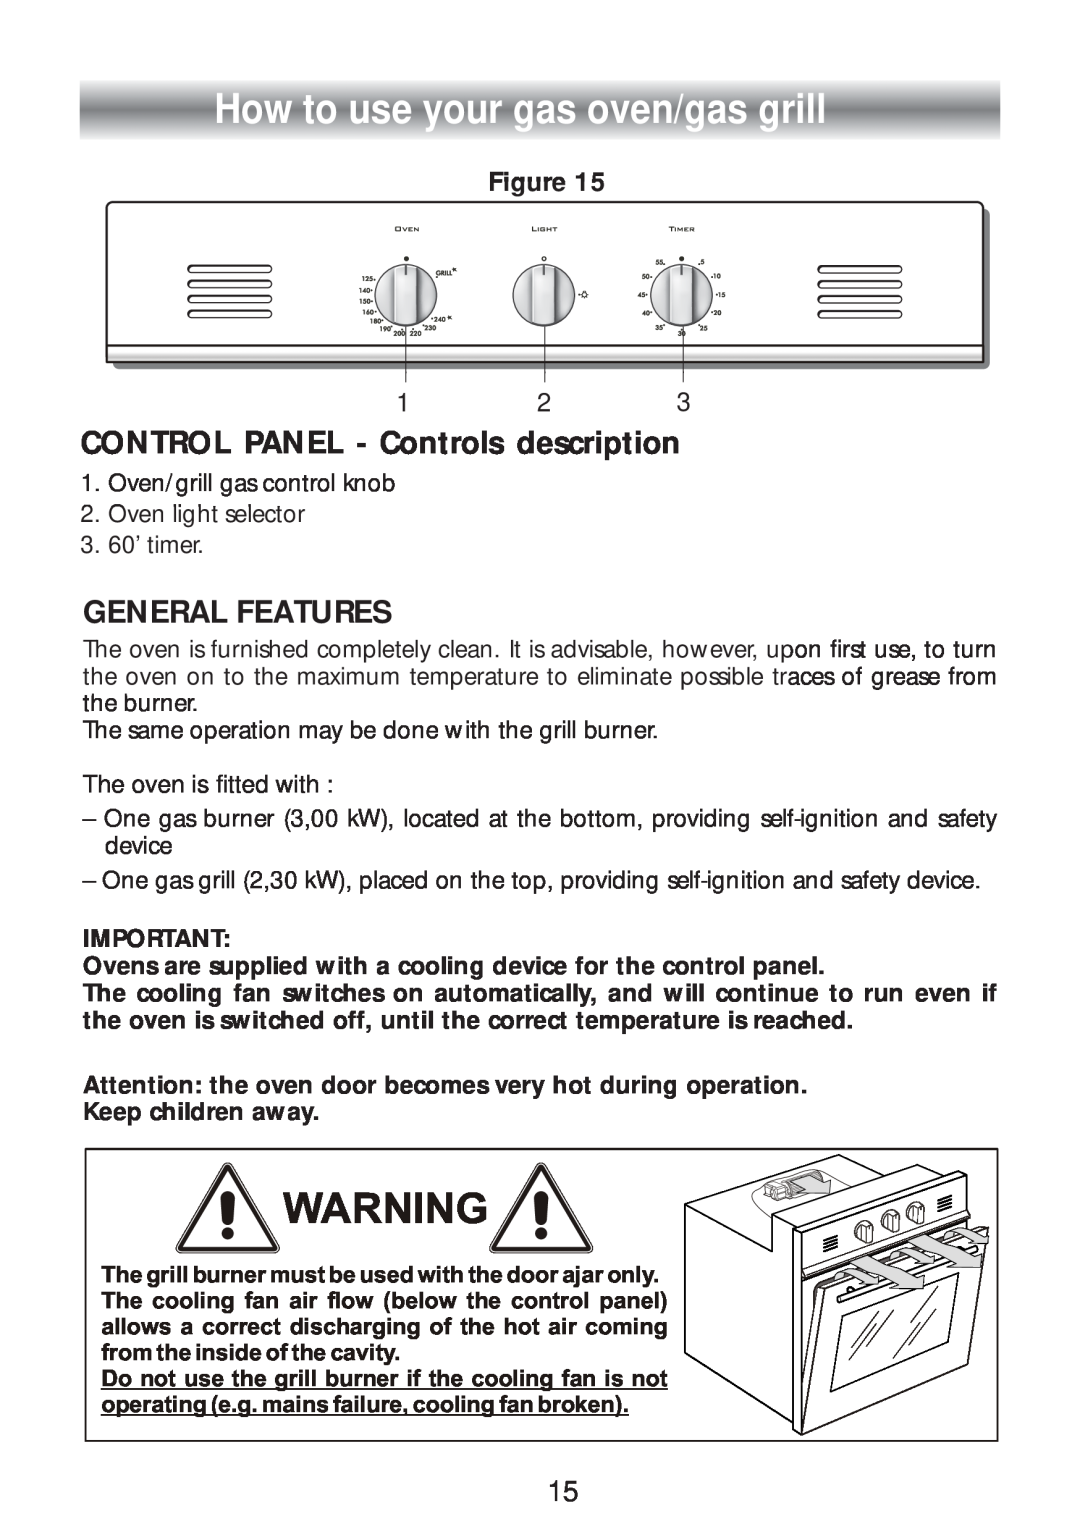 CDA SC309 manual How to use your gas oven/gas grill, CONTROL PANEL - Controls description, General Features 